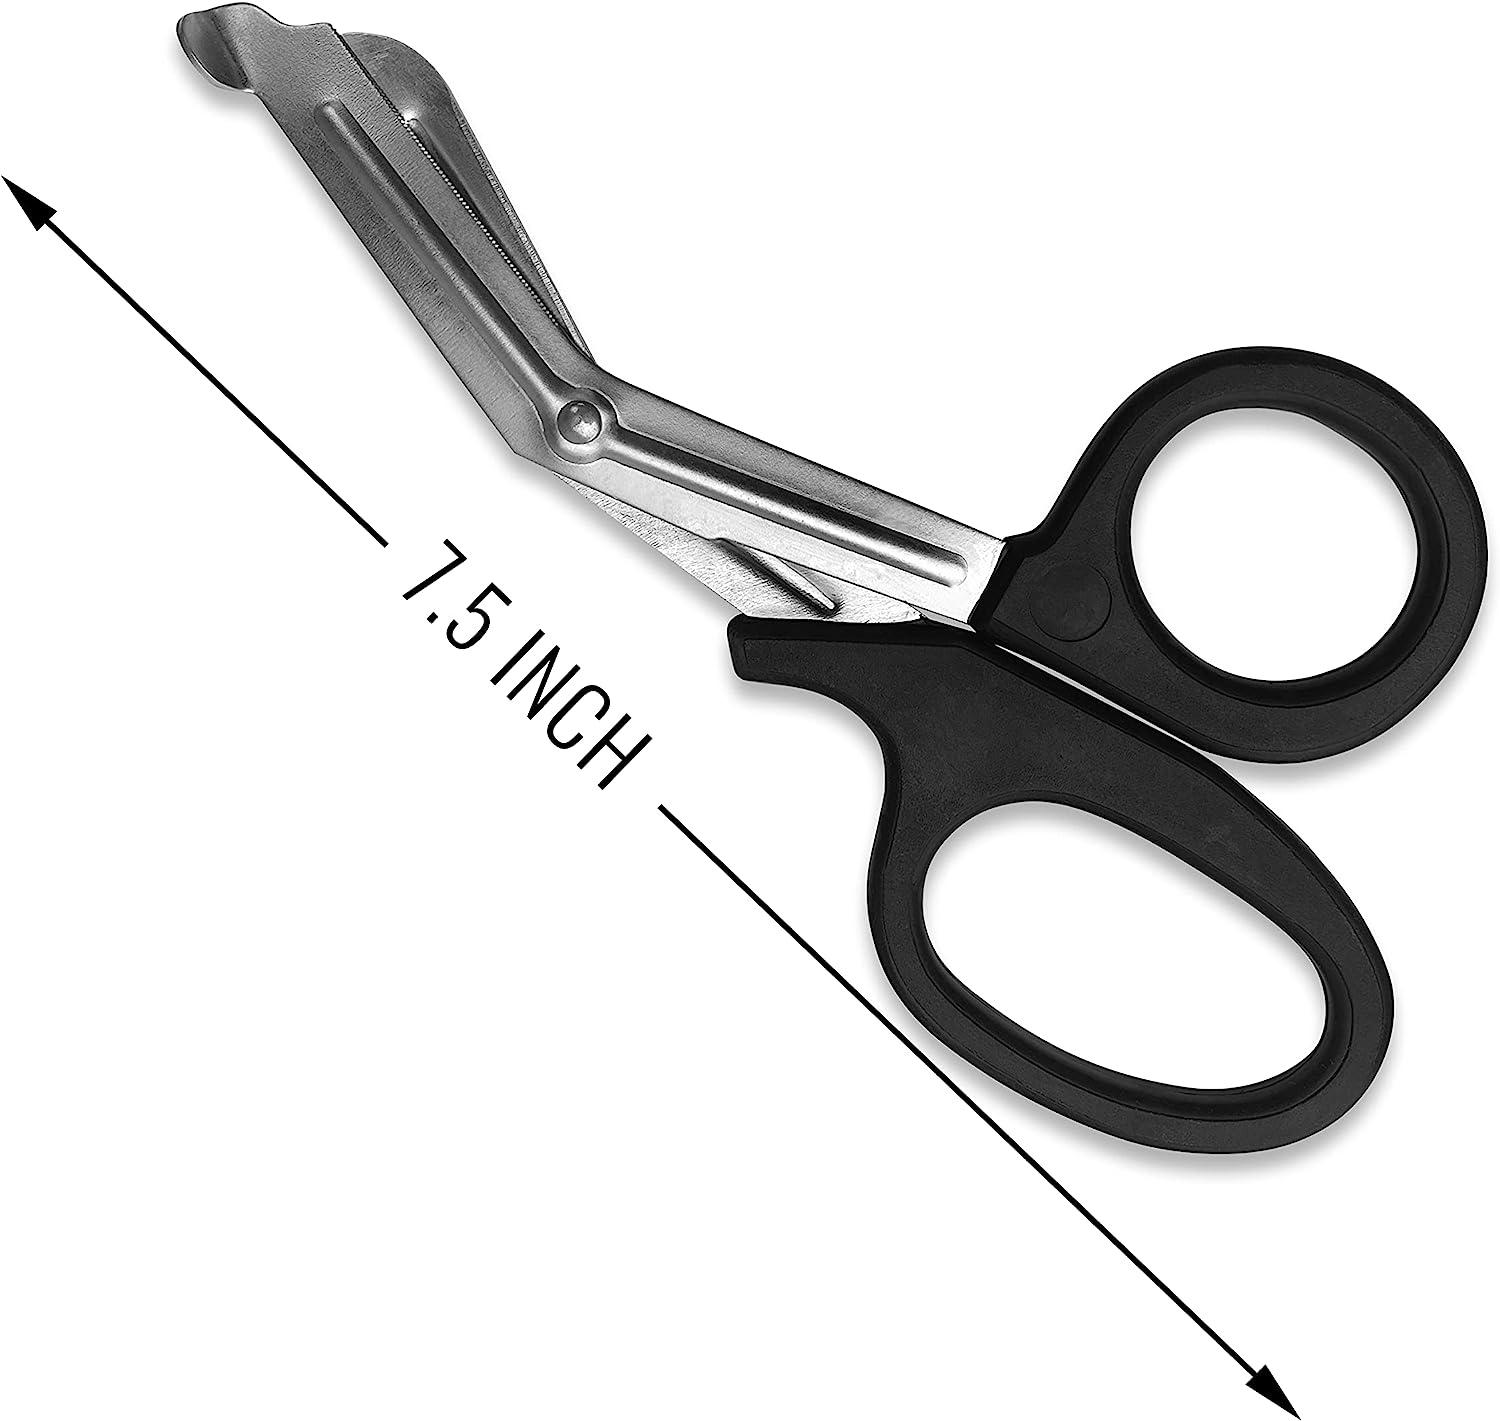 EMT Shears, Nursing Scissors, First Aid Room Supplies, 7 Inches, 10 Pack 